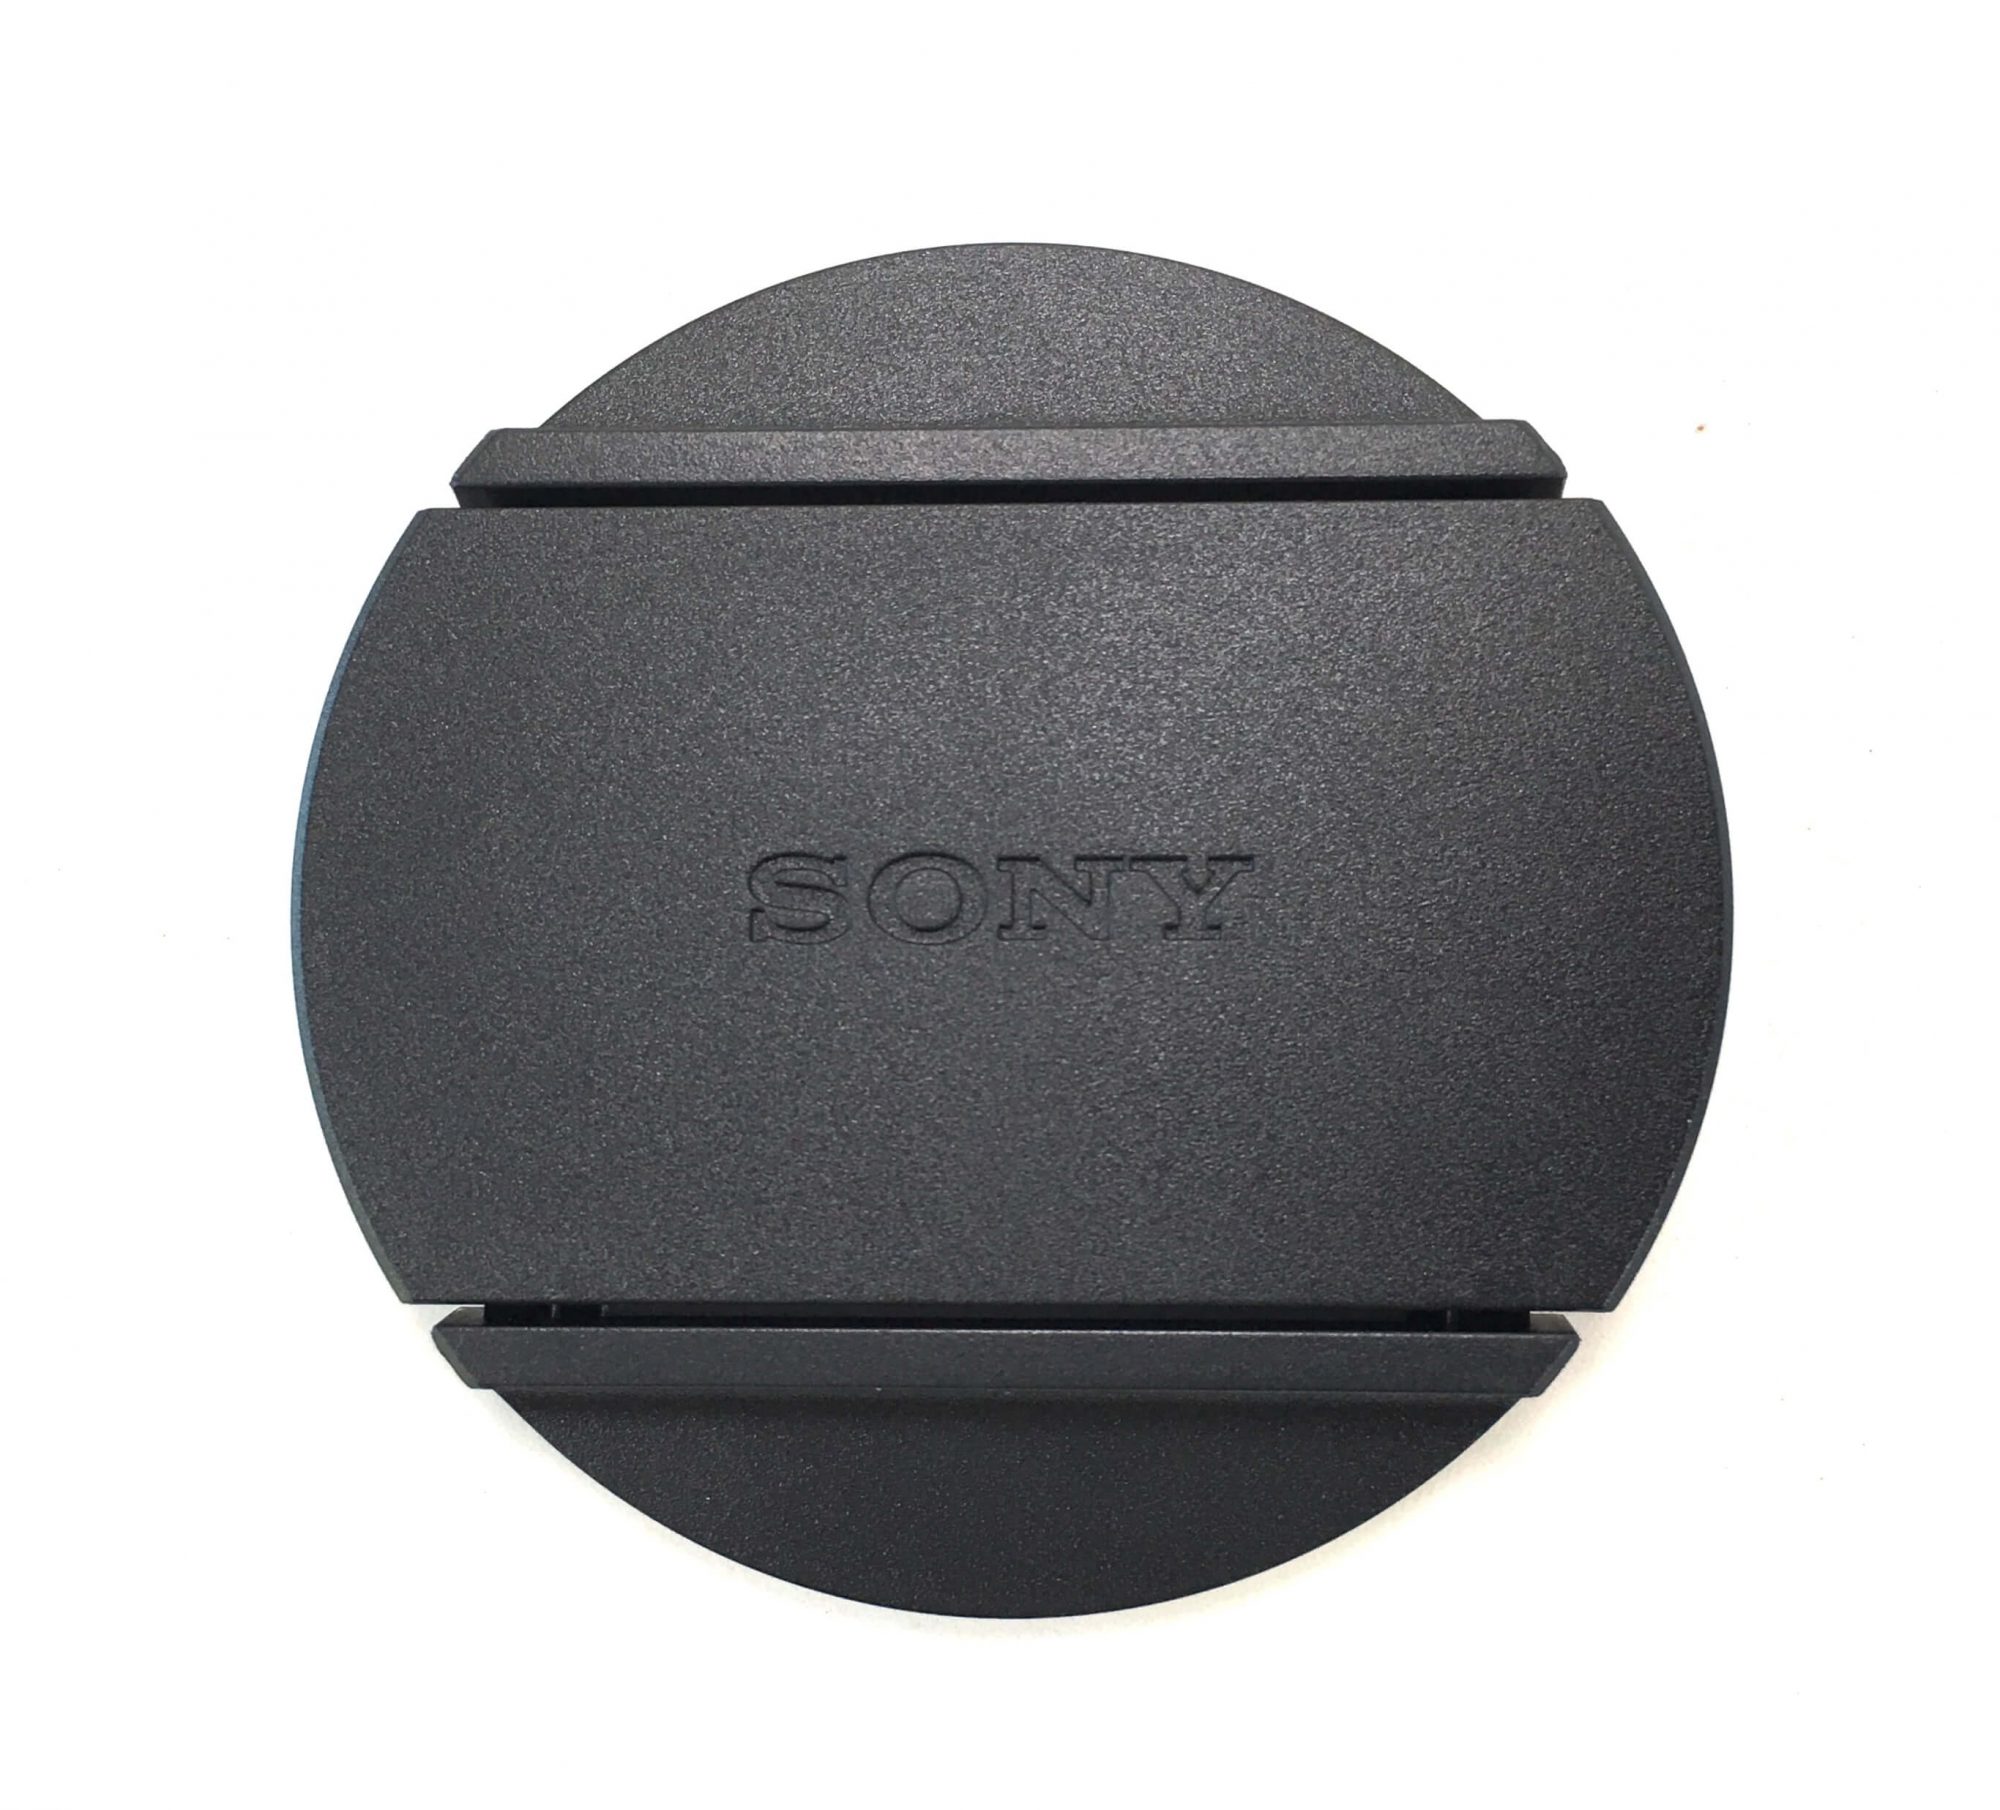 Original Lens Cap that fits on the Sony FDR-AX100 camcorder. It is a genuine Sony part, sourced directly from Sony USA. Brand new factory fresh. Free Shipping.